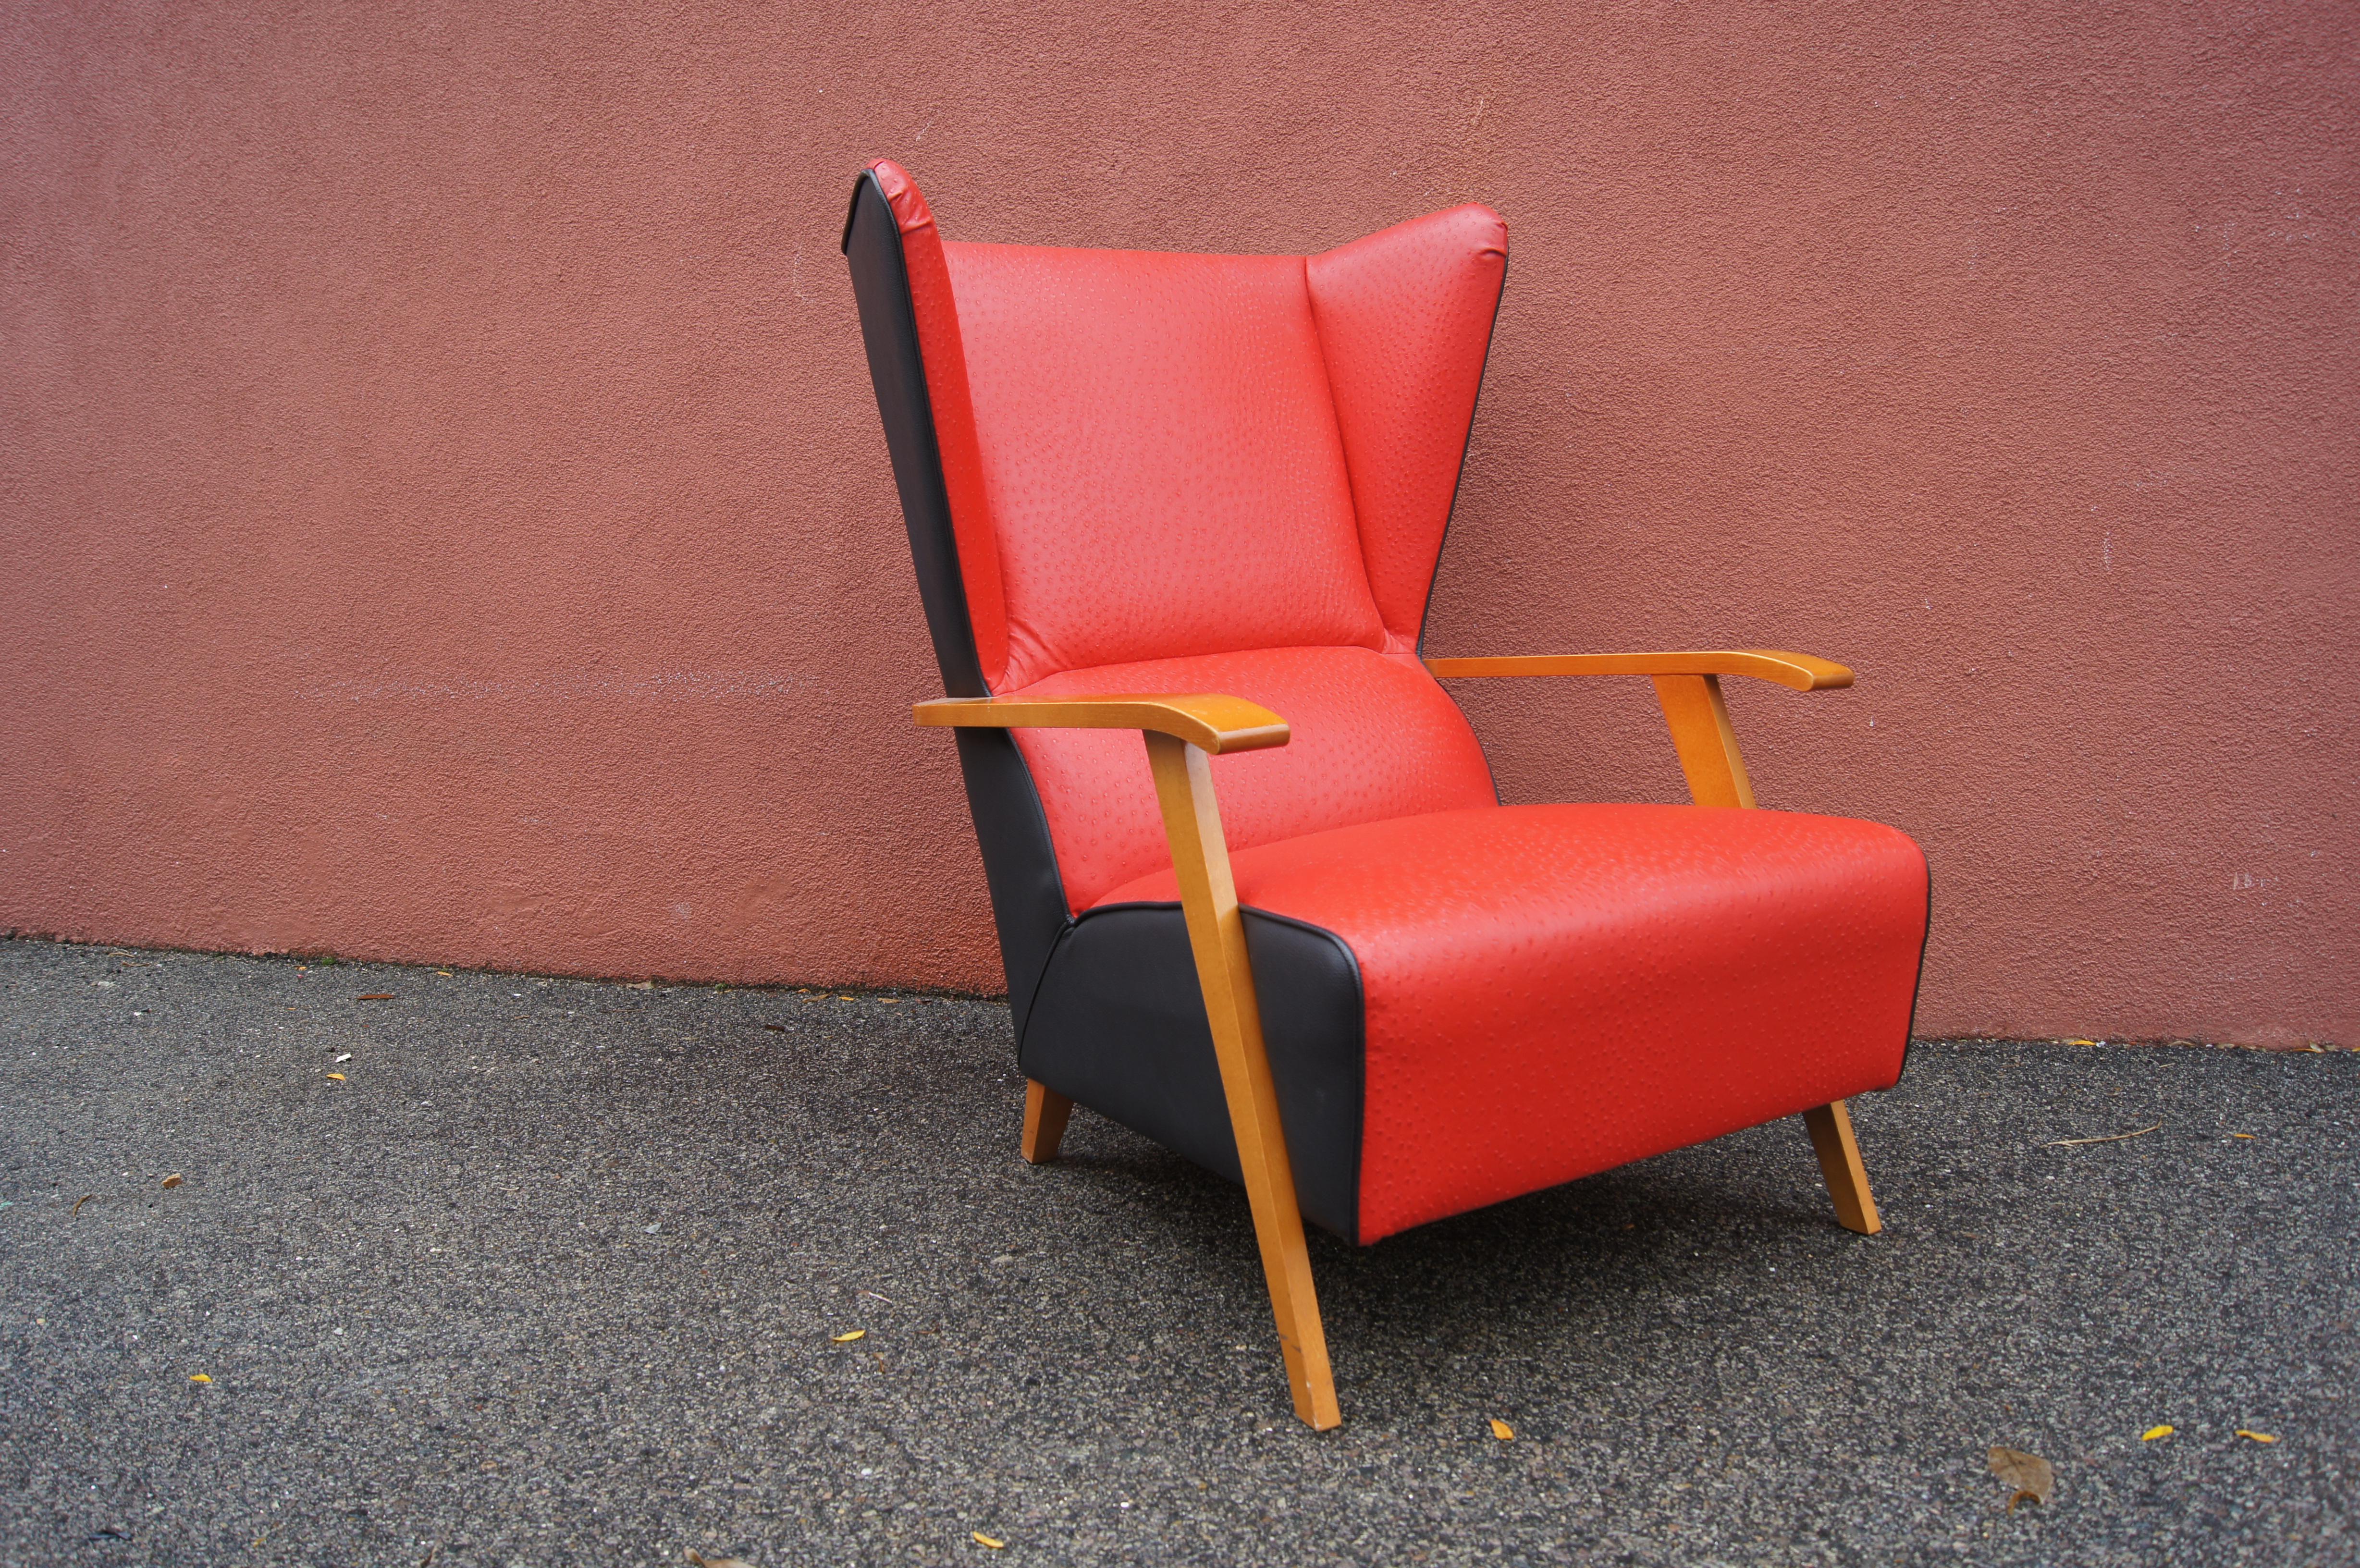 This midcentury Spanish lounge chair features an angular maple frame with a dramatic high back, made more striking by the contrast of ostrich-print red leather in front and black leather in back.